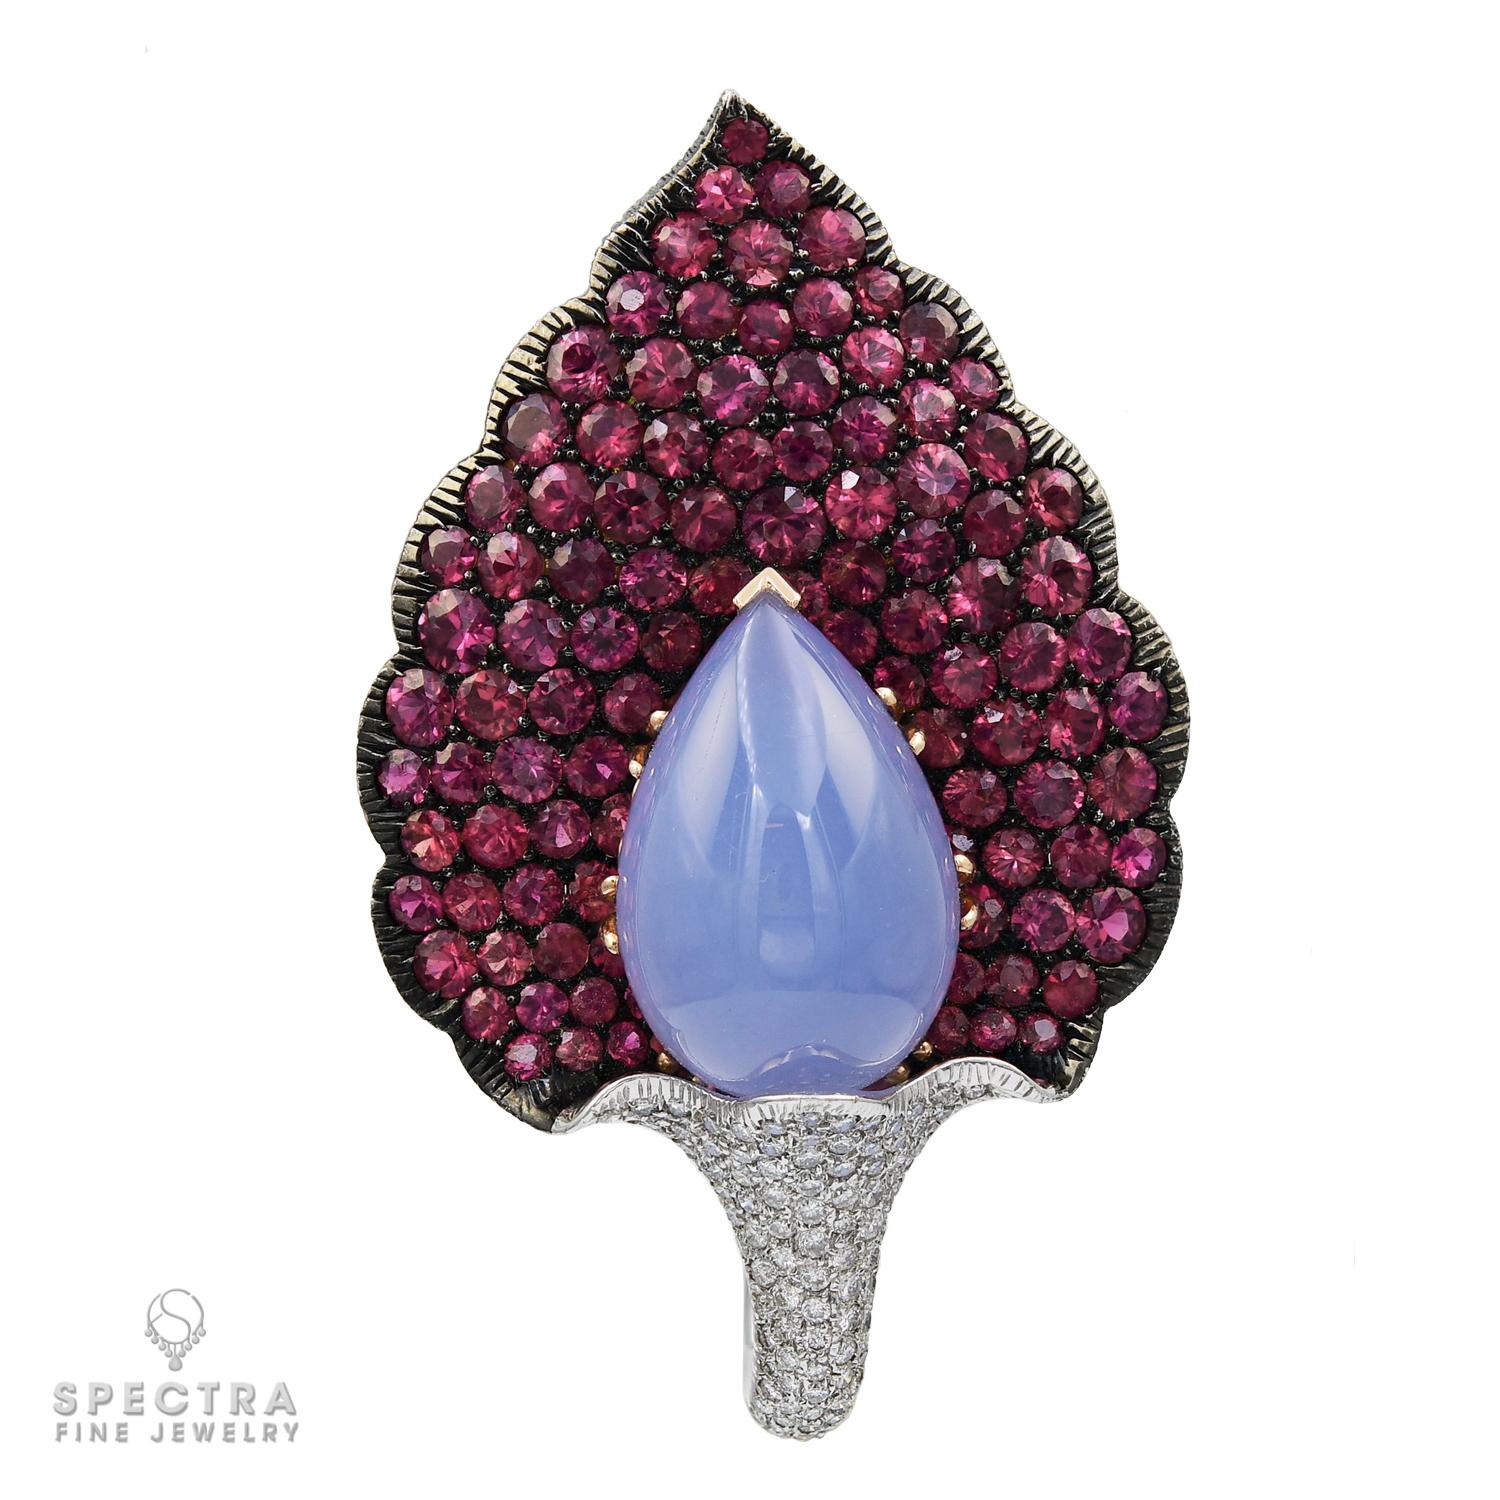 A stunning jewelry suite that exudes elegance and sophistication. This exquisite ensemble consists of a brooch/pendant and a pair of ear clips crafted with meticulous attention to detail.

The focal point of the brooch is a mesmerizing pavé-set pink